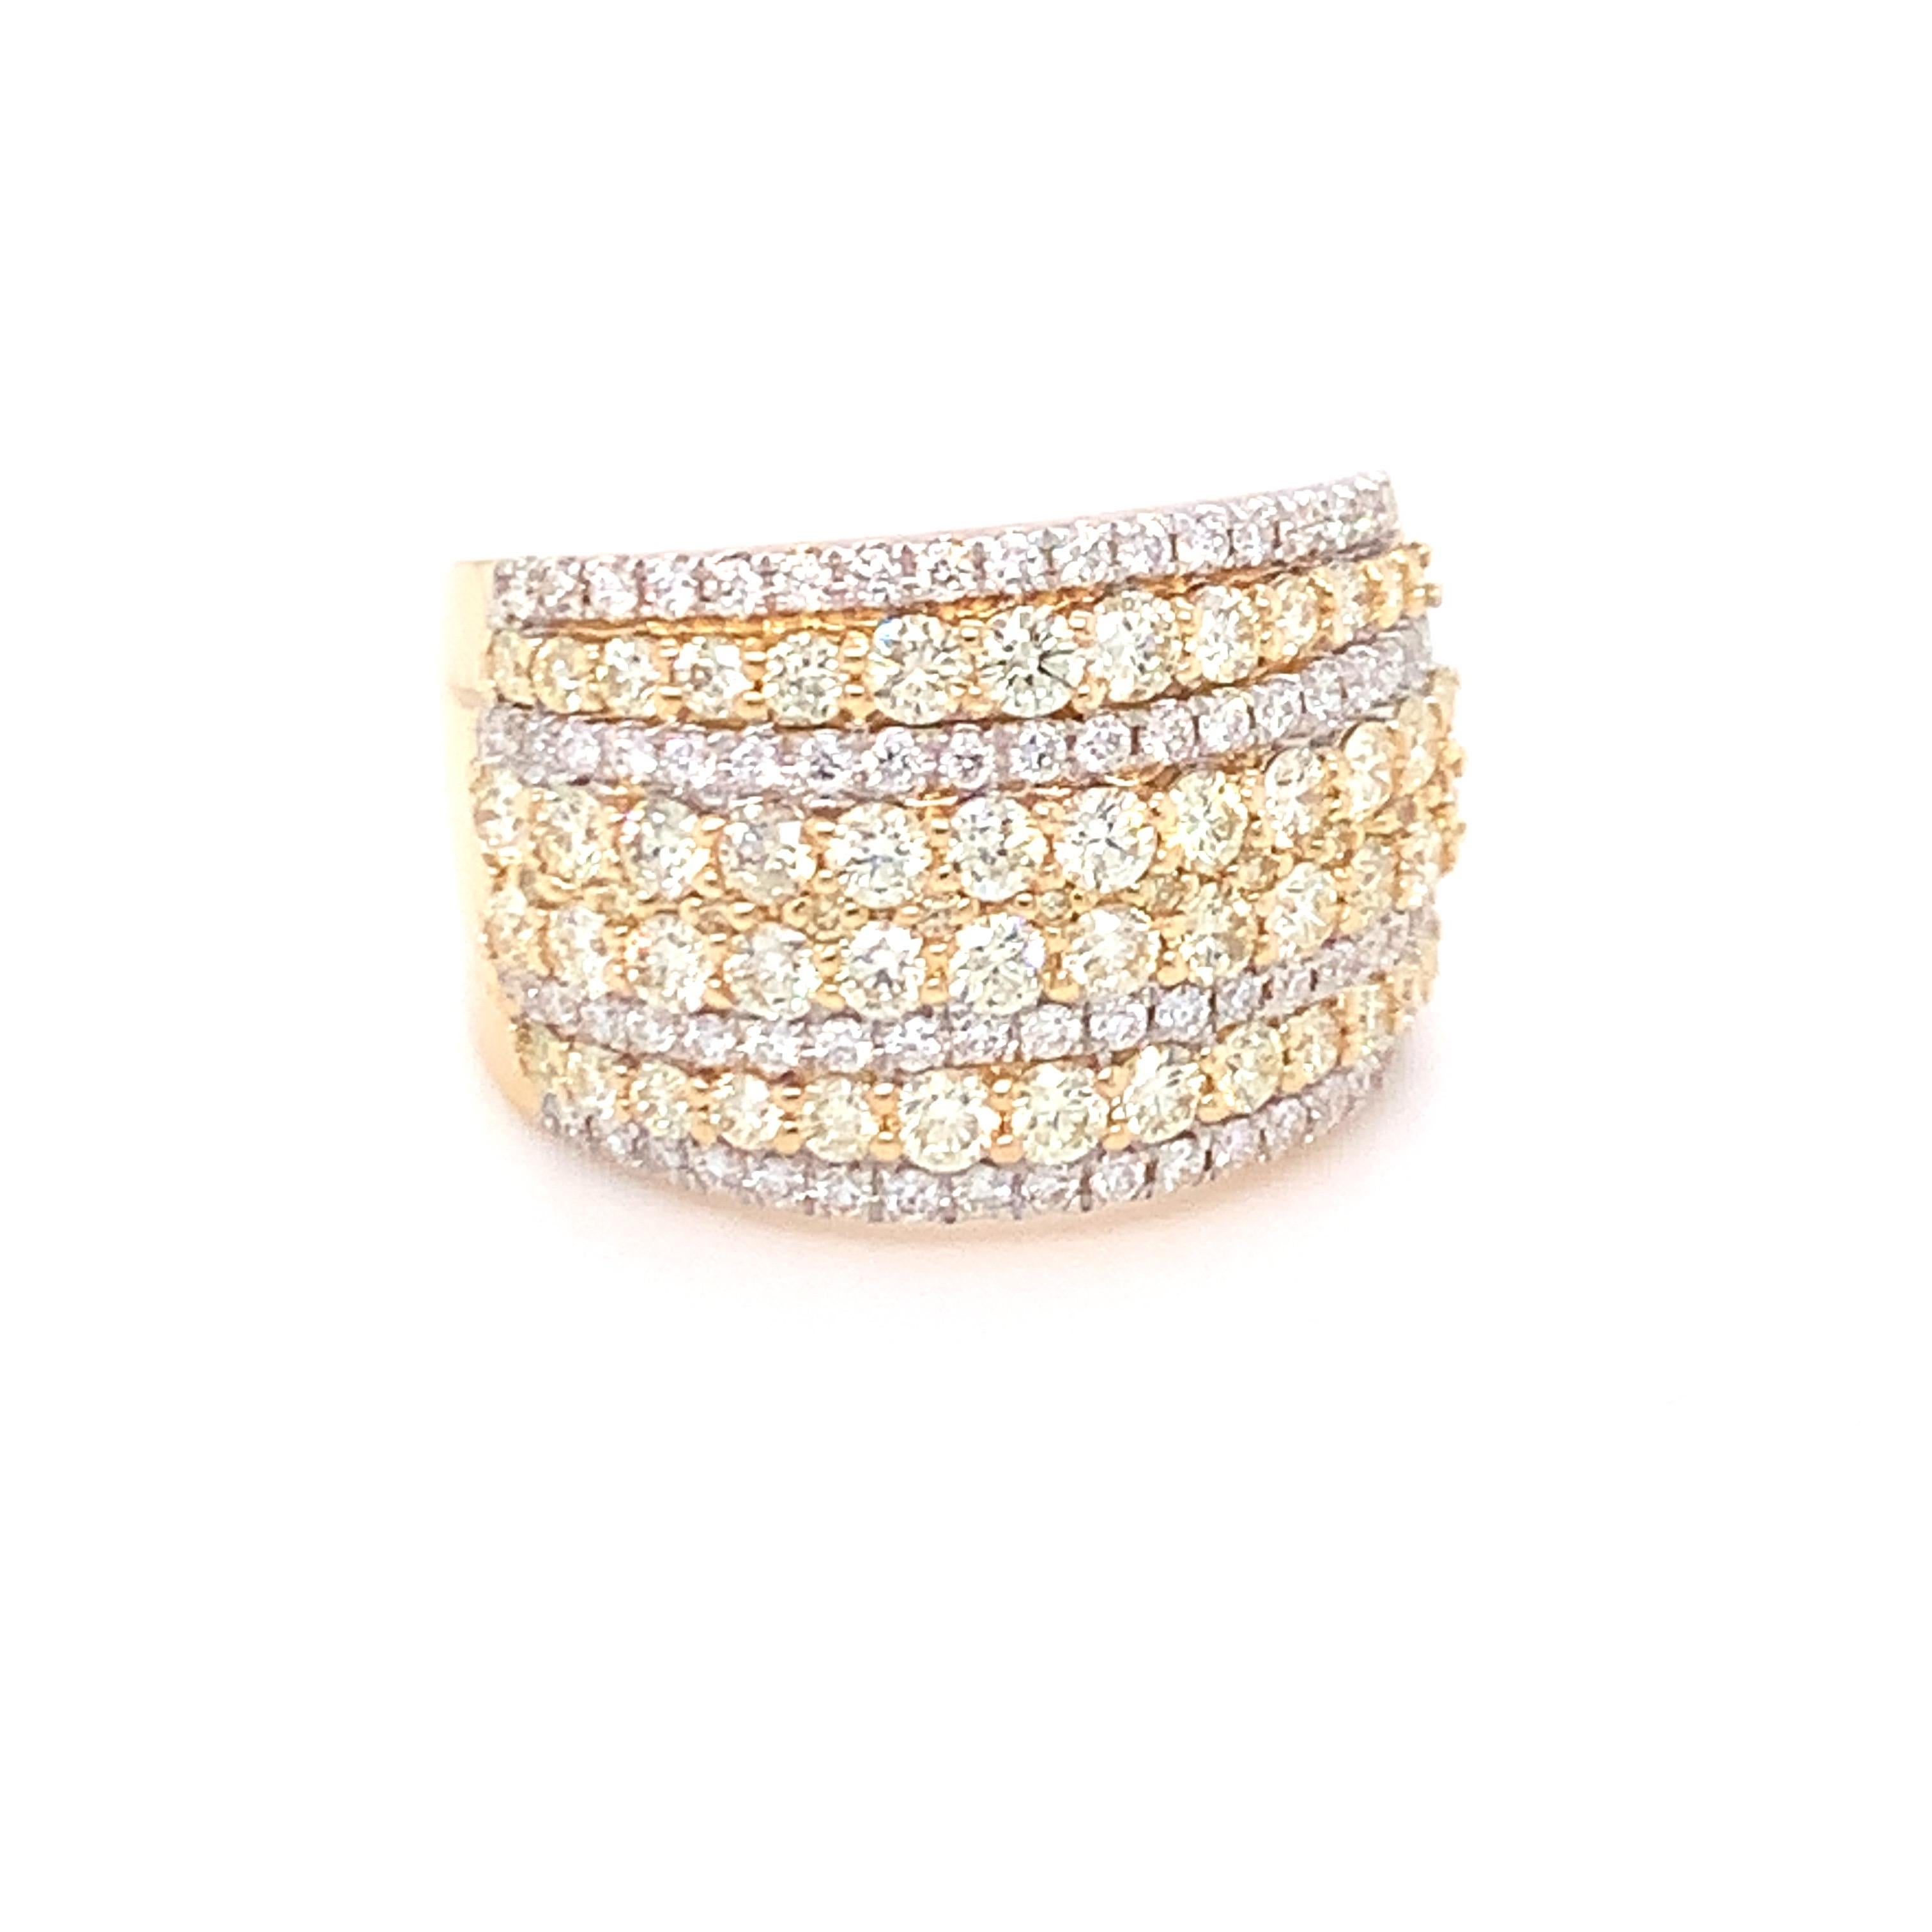 2.08 Carat Diamond Band Ring in 14k Yellow Gold For Sale 3